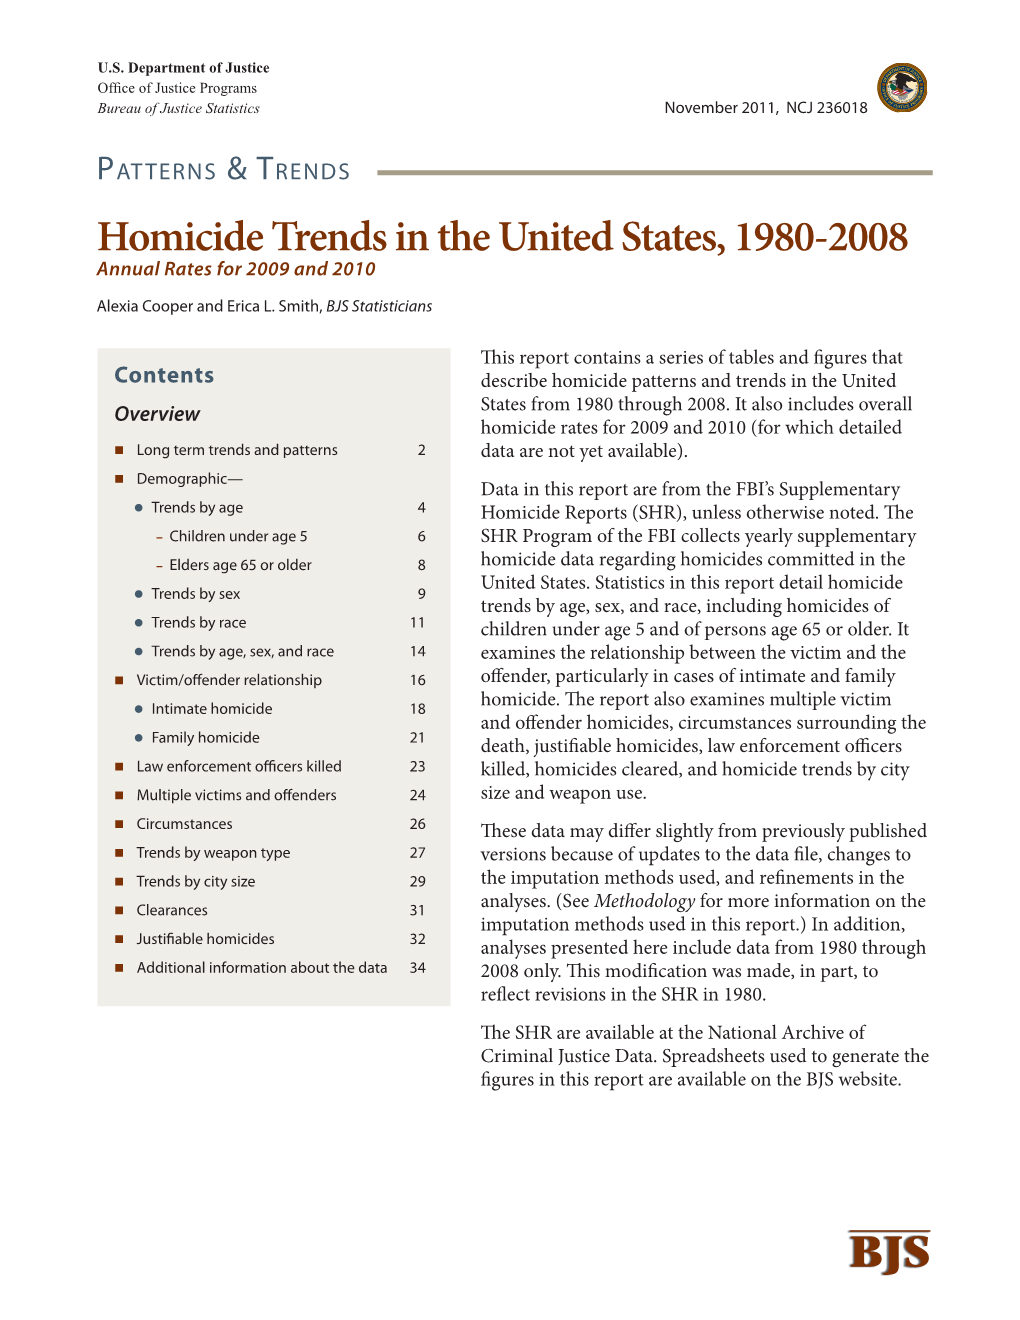 Homicide Trends in the United States, 1980-2008 Annual Rates for 2009 and 2010